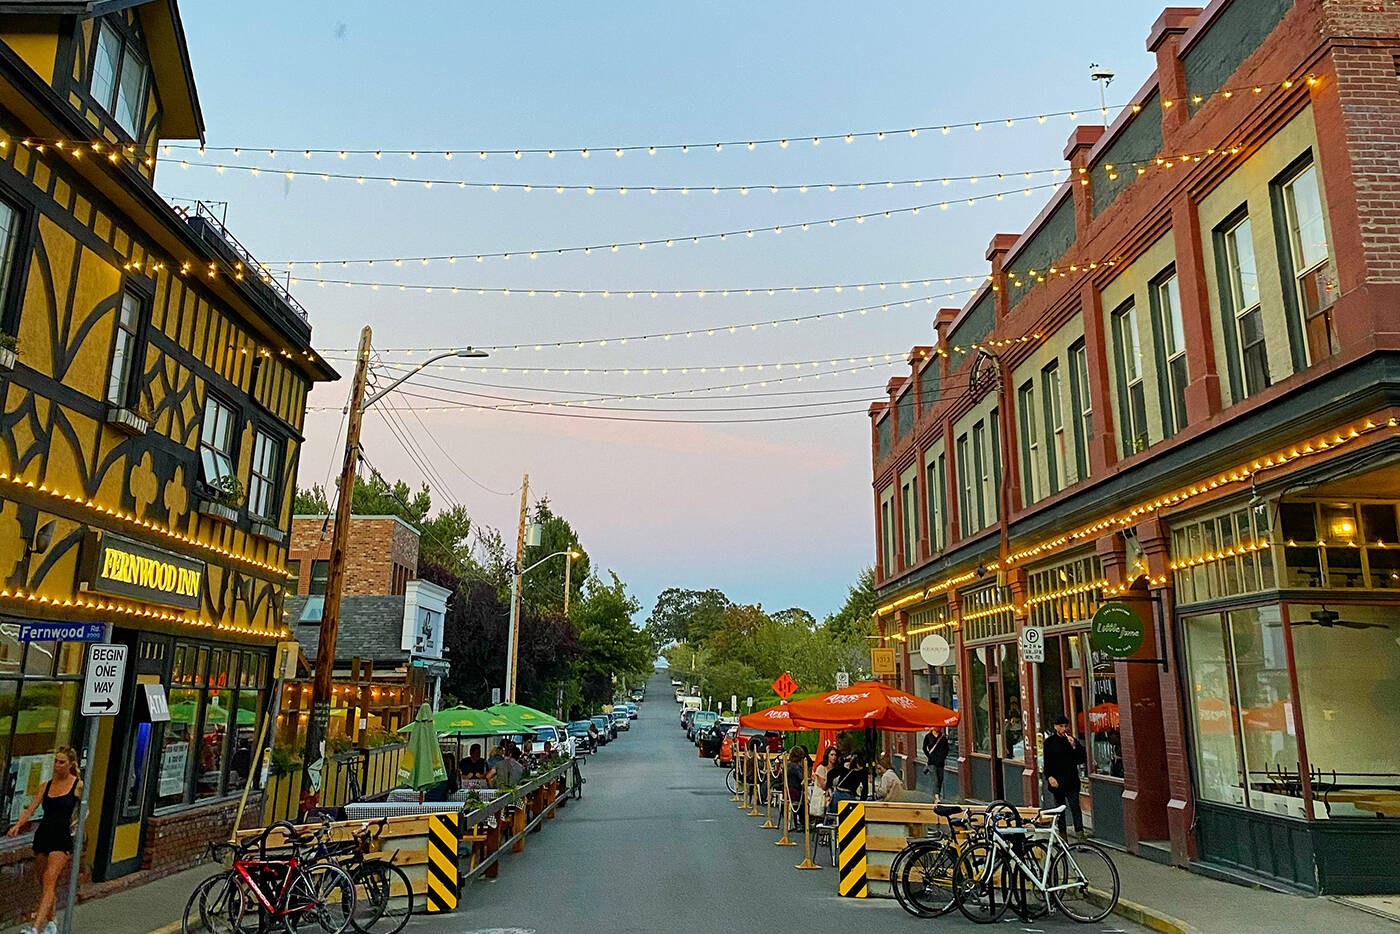 The province has extended its pandemic patio program until next spring. The patios in the 1300-block of Gladstone Avenue serve as a pilot program as Victoria explores permanently allowing street and sidewalk dining spaces. (Courtesy Build Back Victoria)